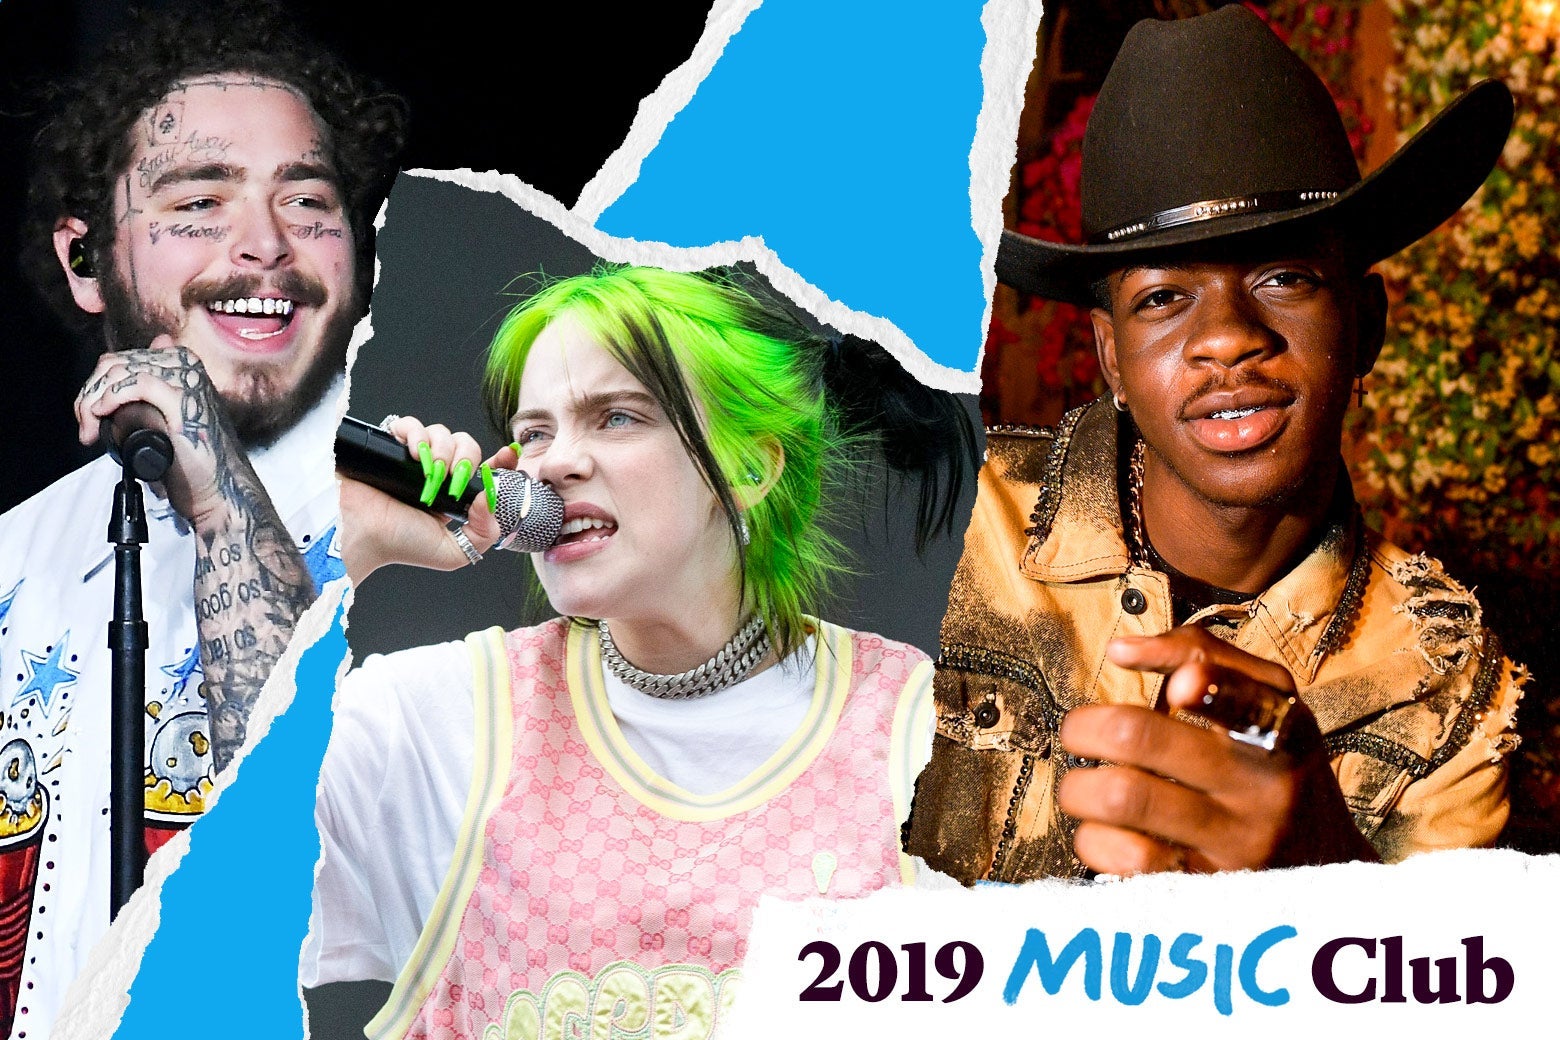 Post Malone, Billie Eilish, and Lil Nas X with text in the corner that says, "2019 Music Club."